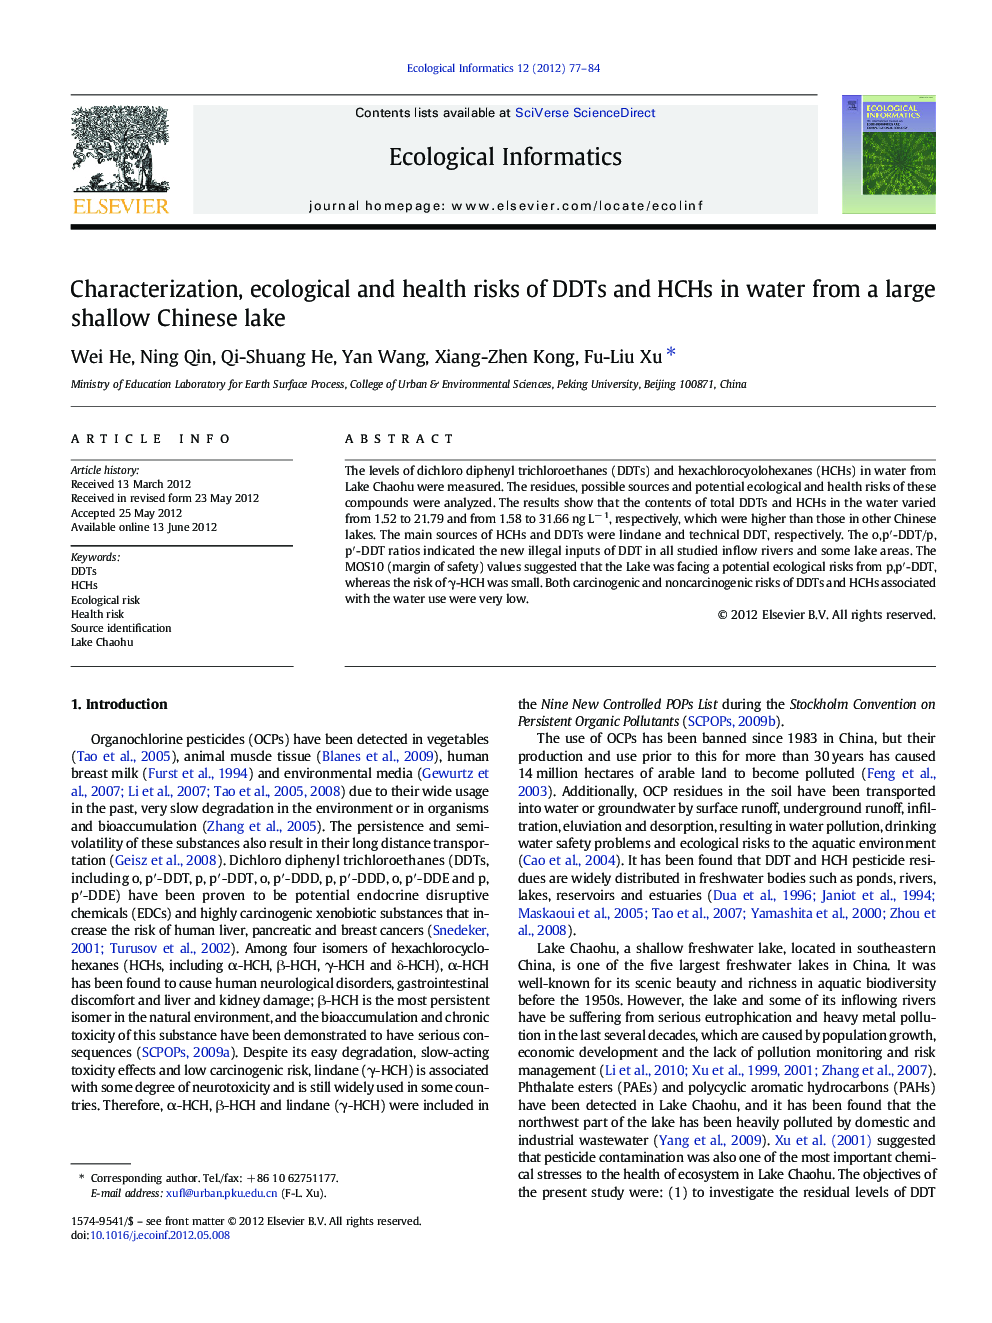 Characterization, ecological and health risks of DDTs and HCHs in water from a large shallow Chinese lake